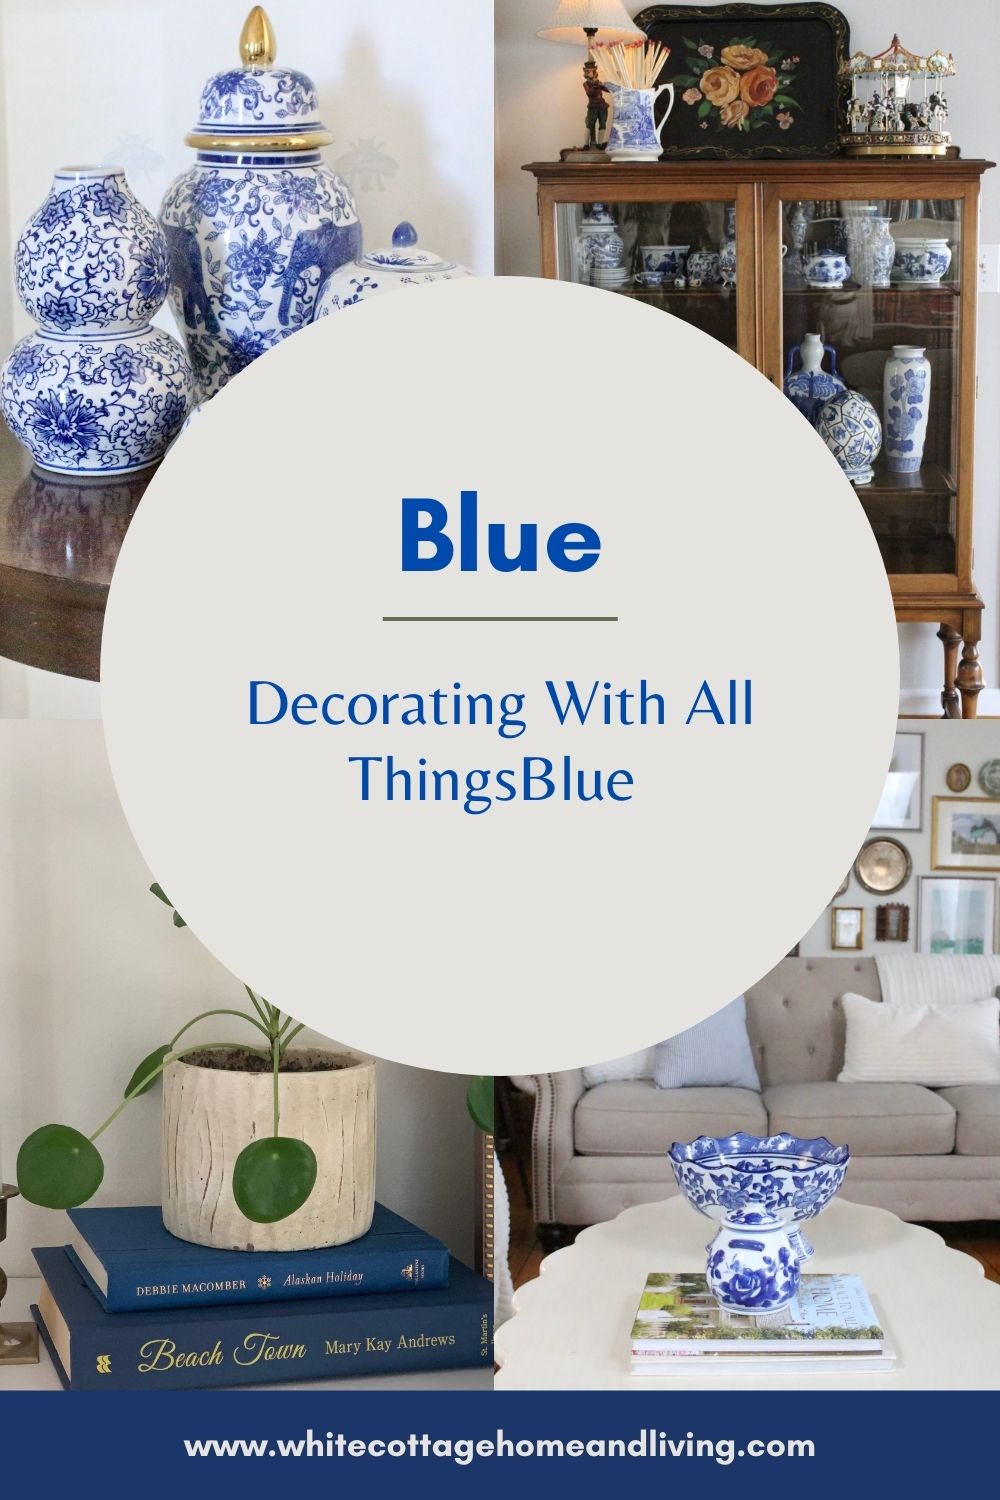 Decorating with All Things Blue~ White Cottage Home & Living